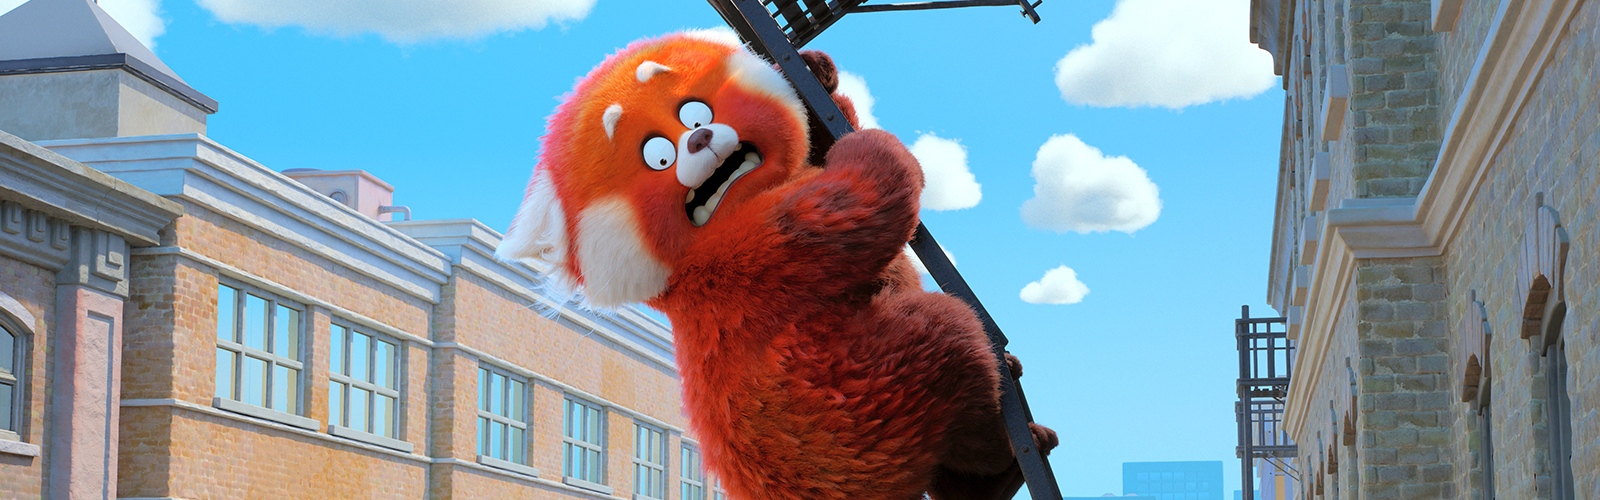 Pixar Gets Refreshingly Weird In ‘Turning Red’